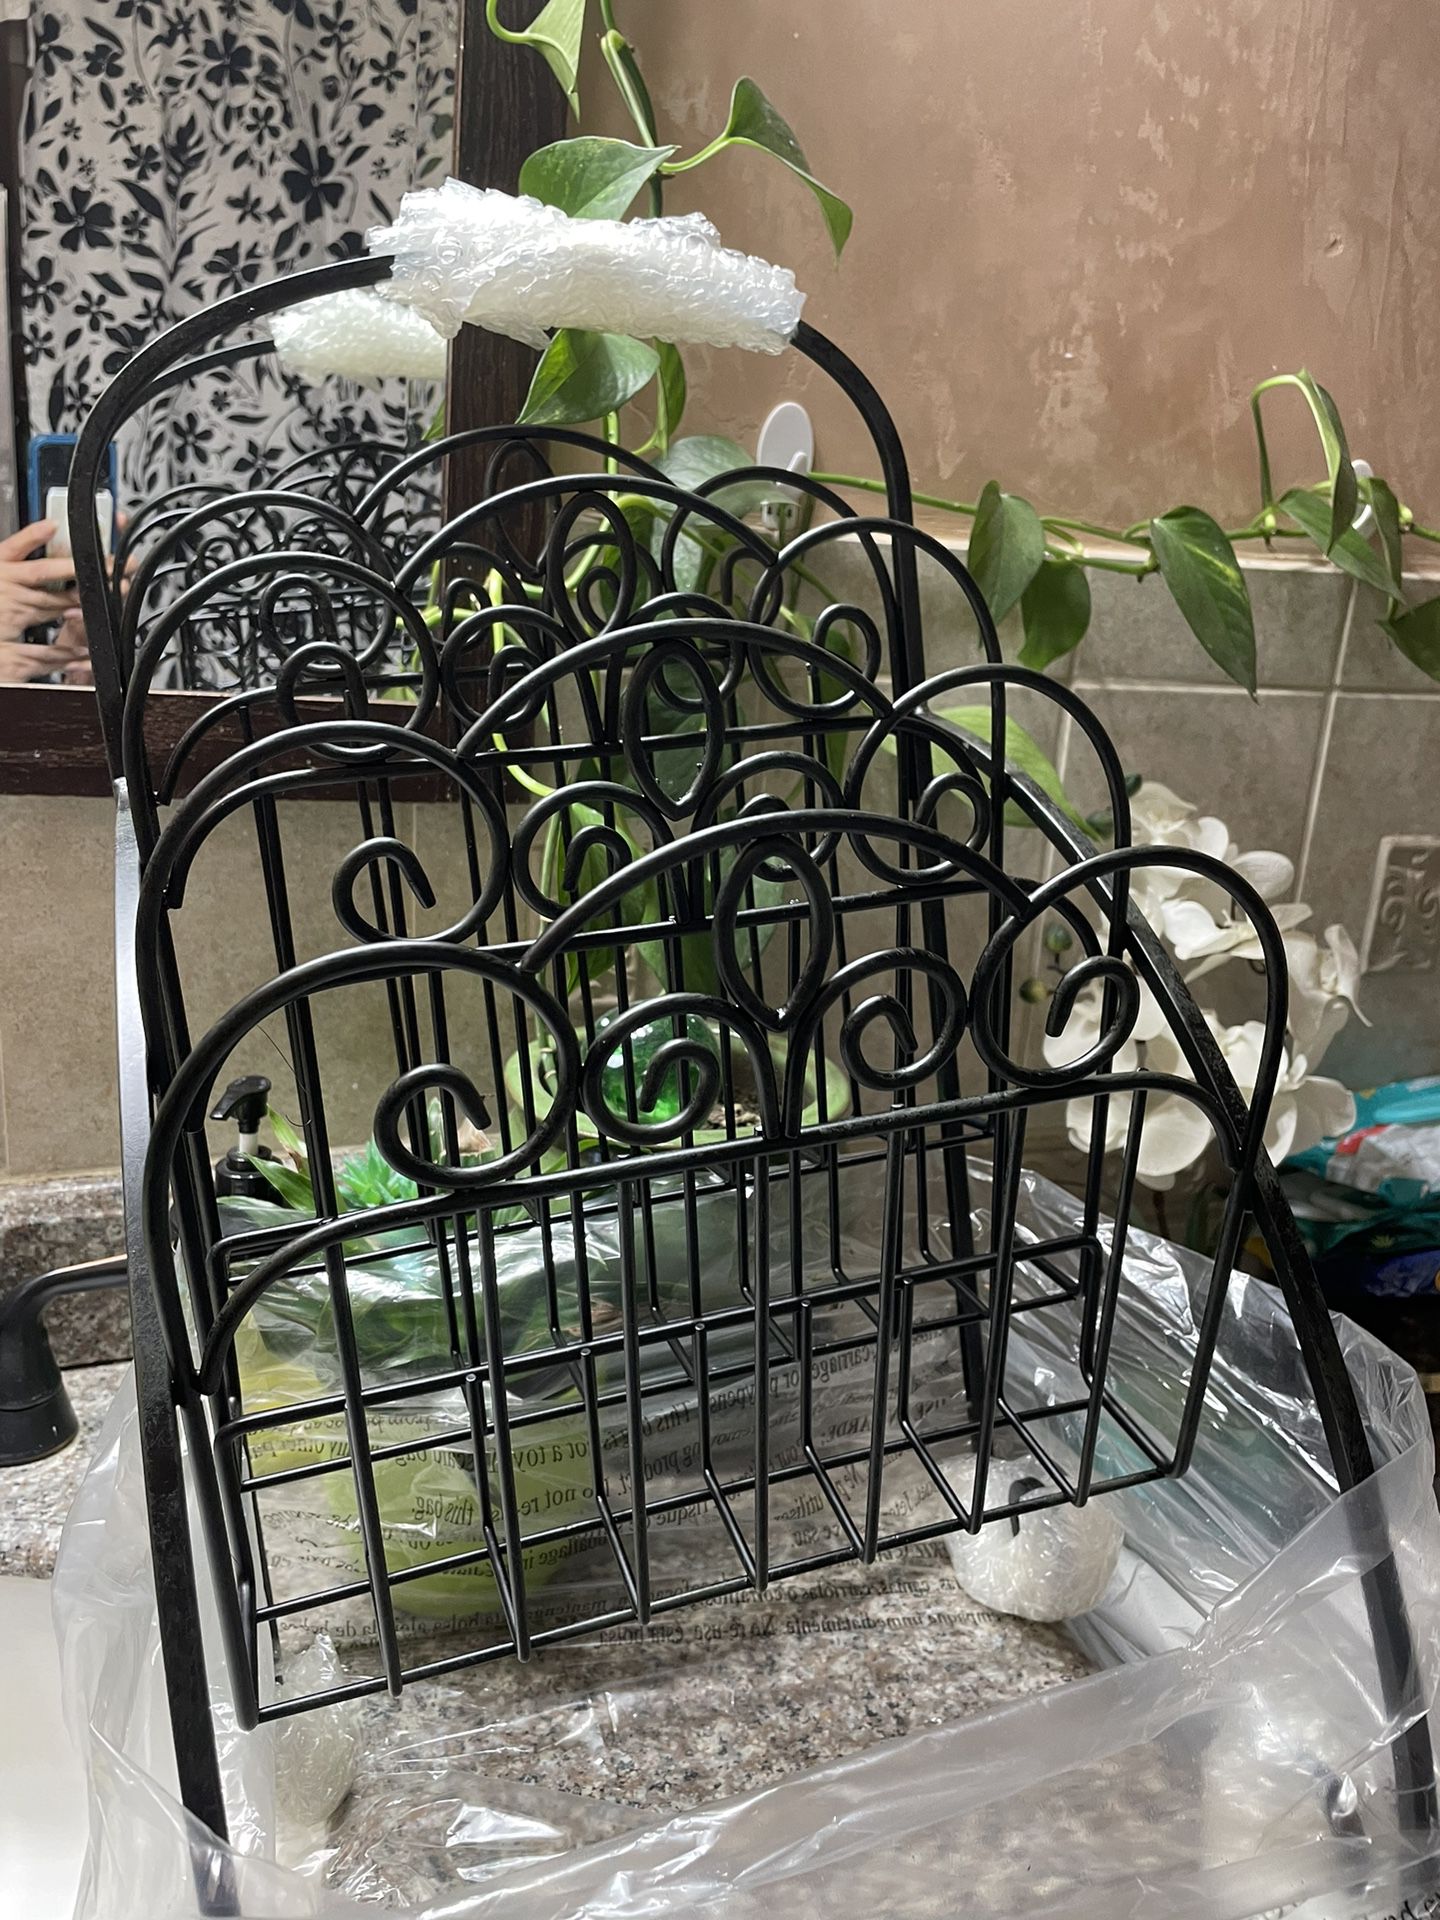 Cascade MAGAZINE RACK handcrafted cascading magazine rack made from wrought iron will keep your magazines, newspaper and books organized Natural black